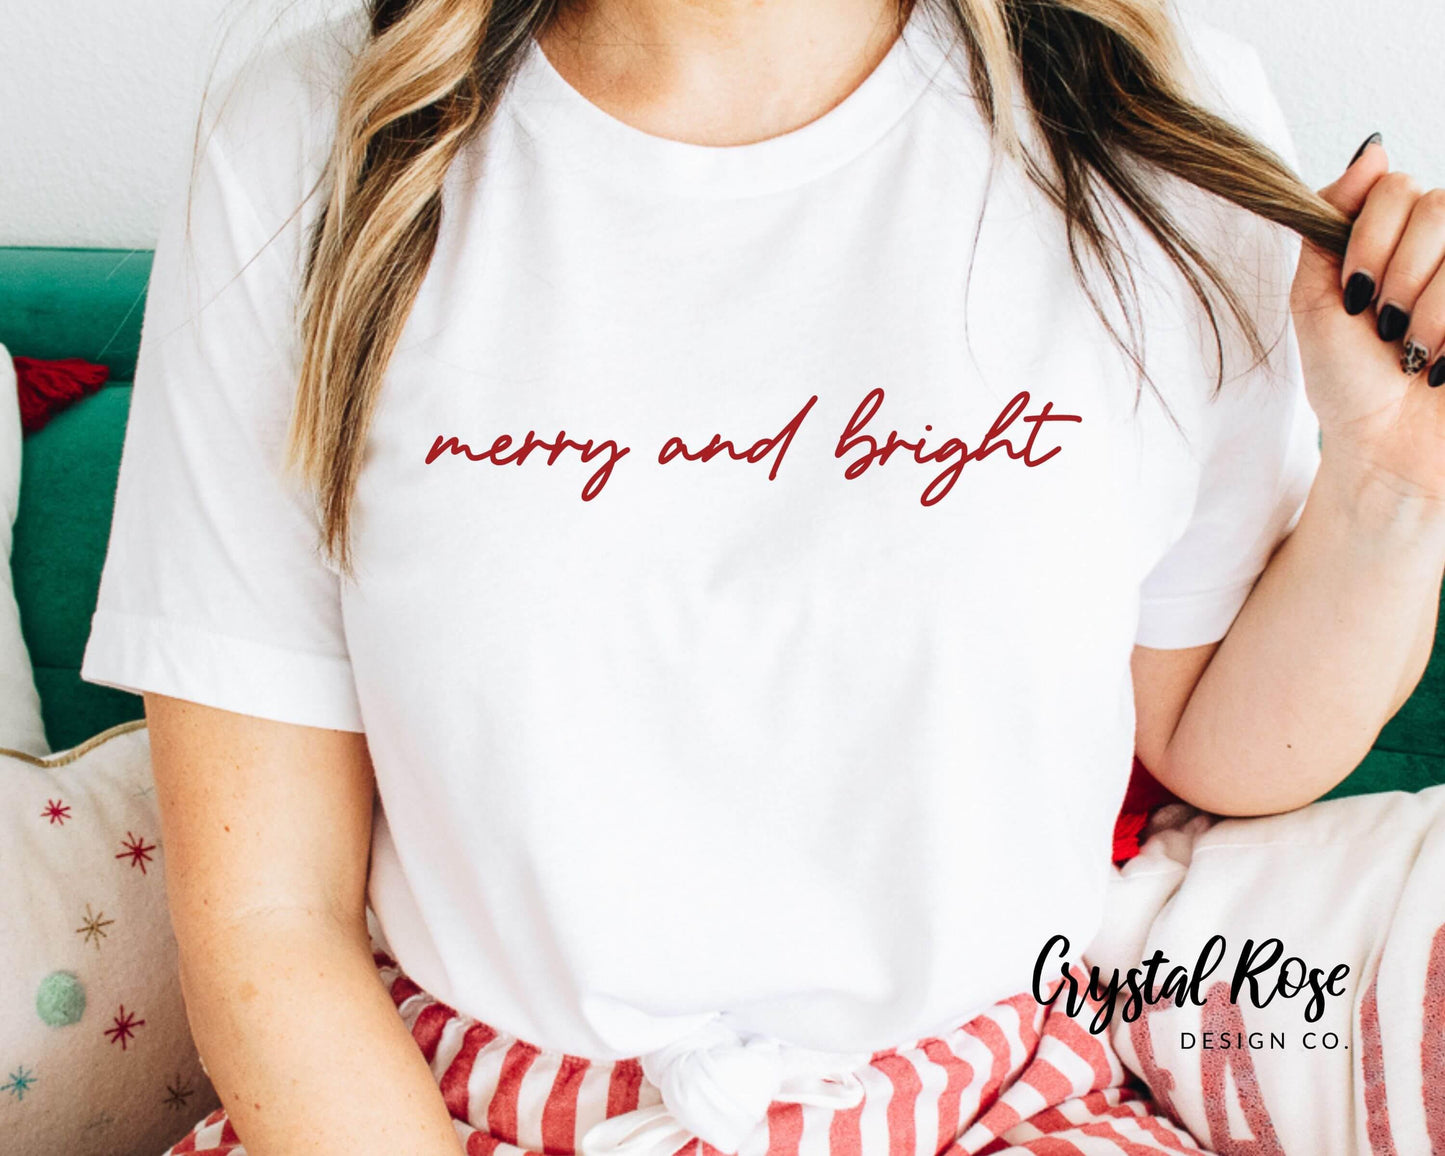 Merry and Bright Simple Christmas Shirt Short Sleeve Tee